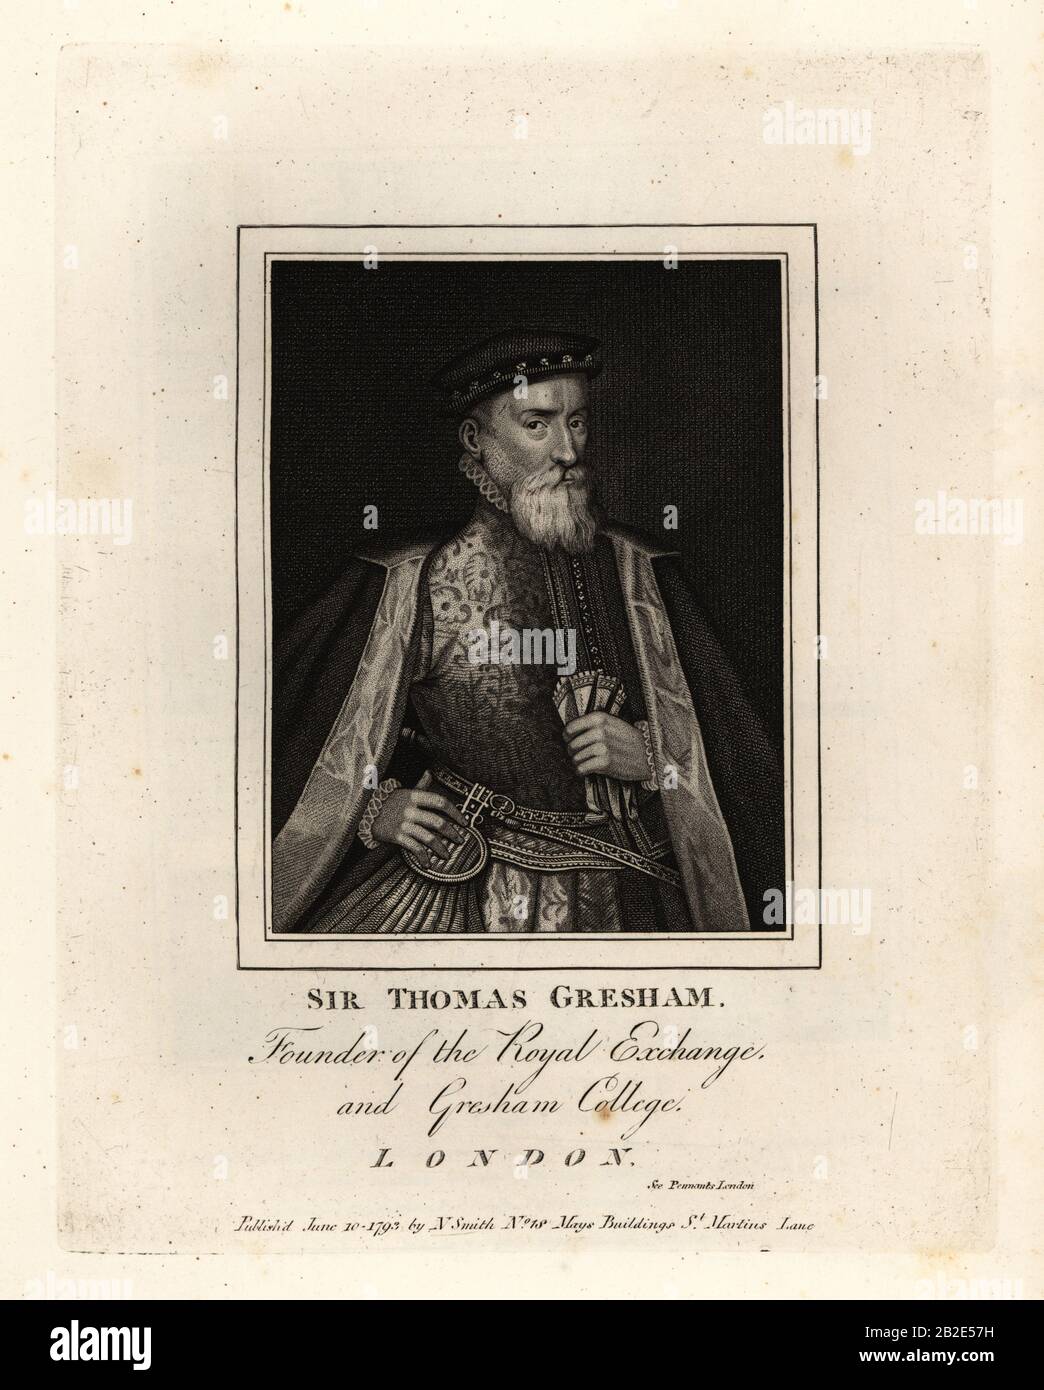 Sir Thomas Gresham, English merchant and financier, founder of the Royal Exchange and Gresham College, 1519-1579. Copperplate engraving by John Thomas Smith after original drawings by members of the Society of Antiquaries from his J.T. Smith’s Antiquities of London and its Environs, J. Sewell, R. Folder, J. Simco, London, 1793. Stock Photo